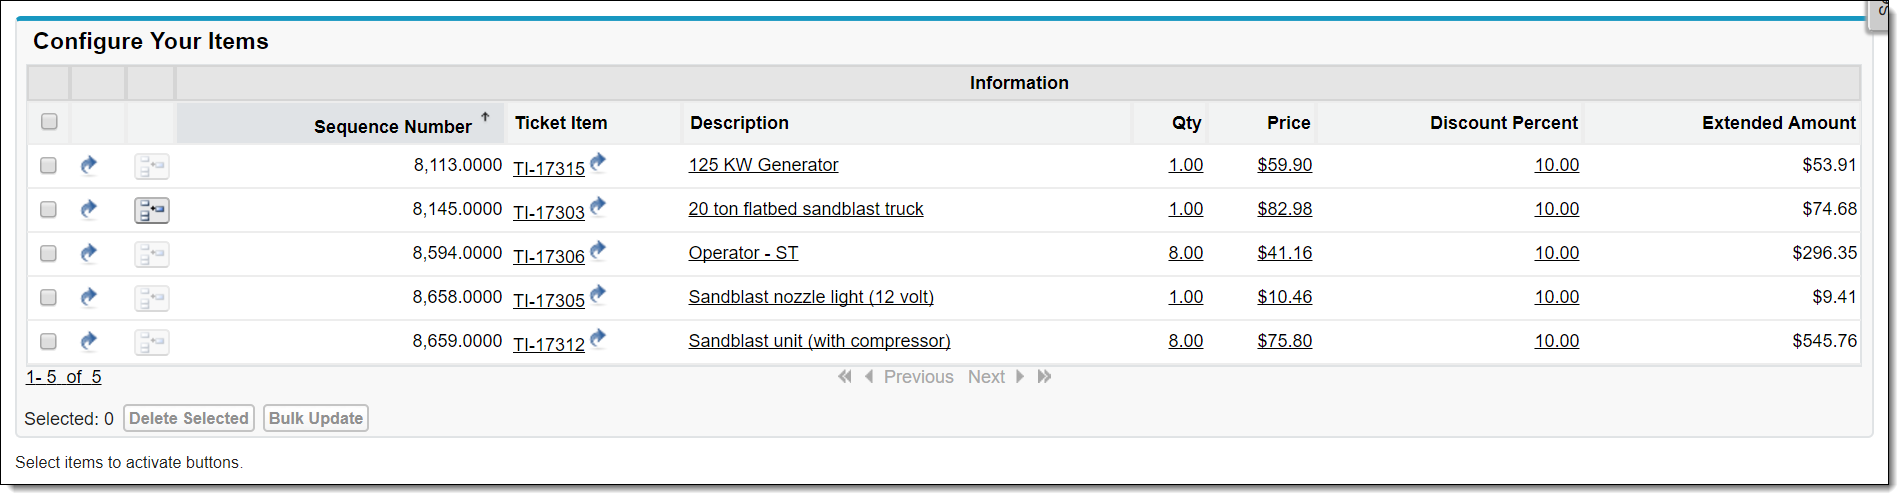 Screenshot of an example Invoice Item Grid